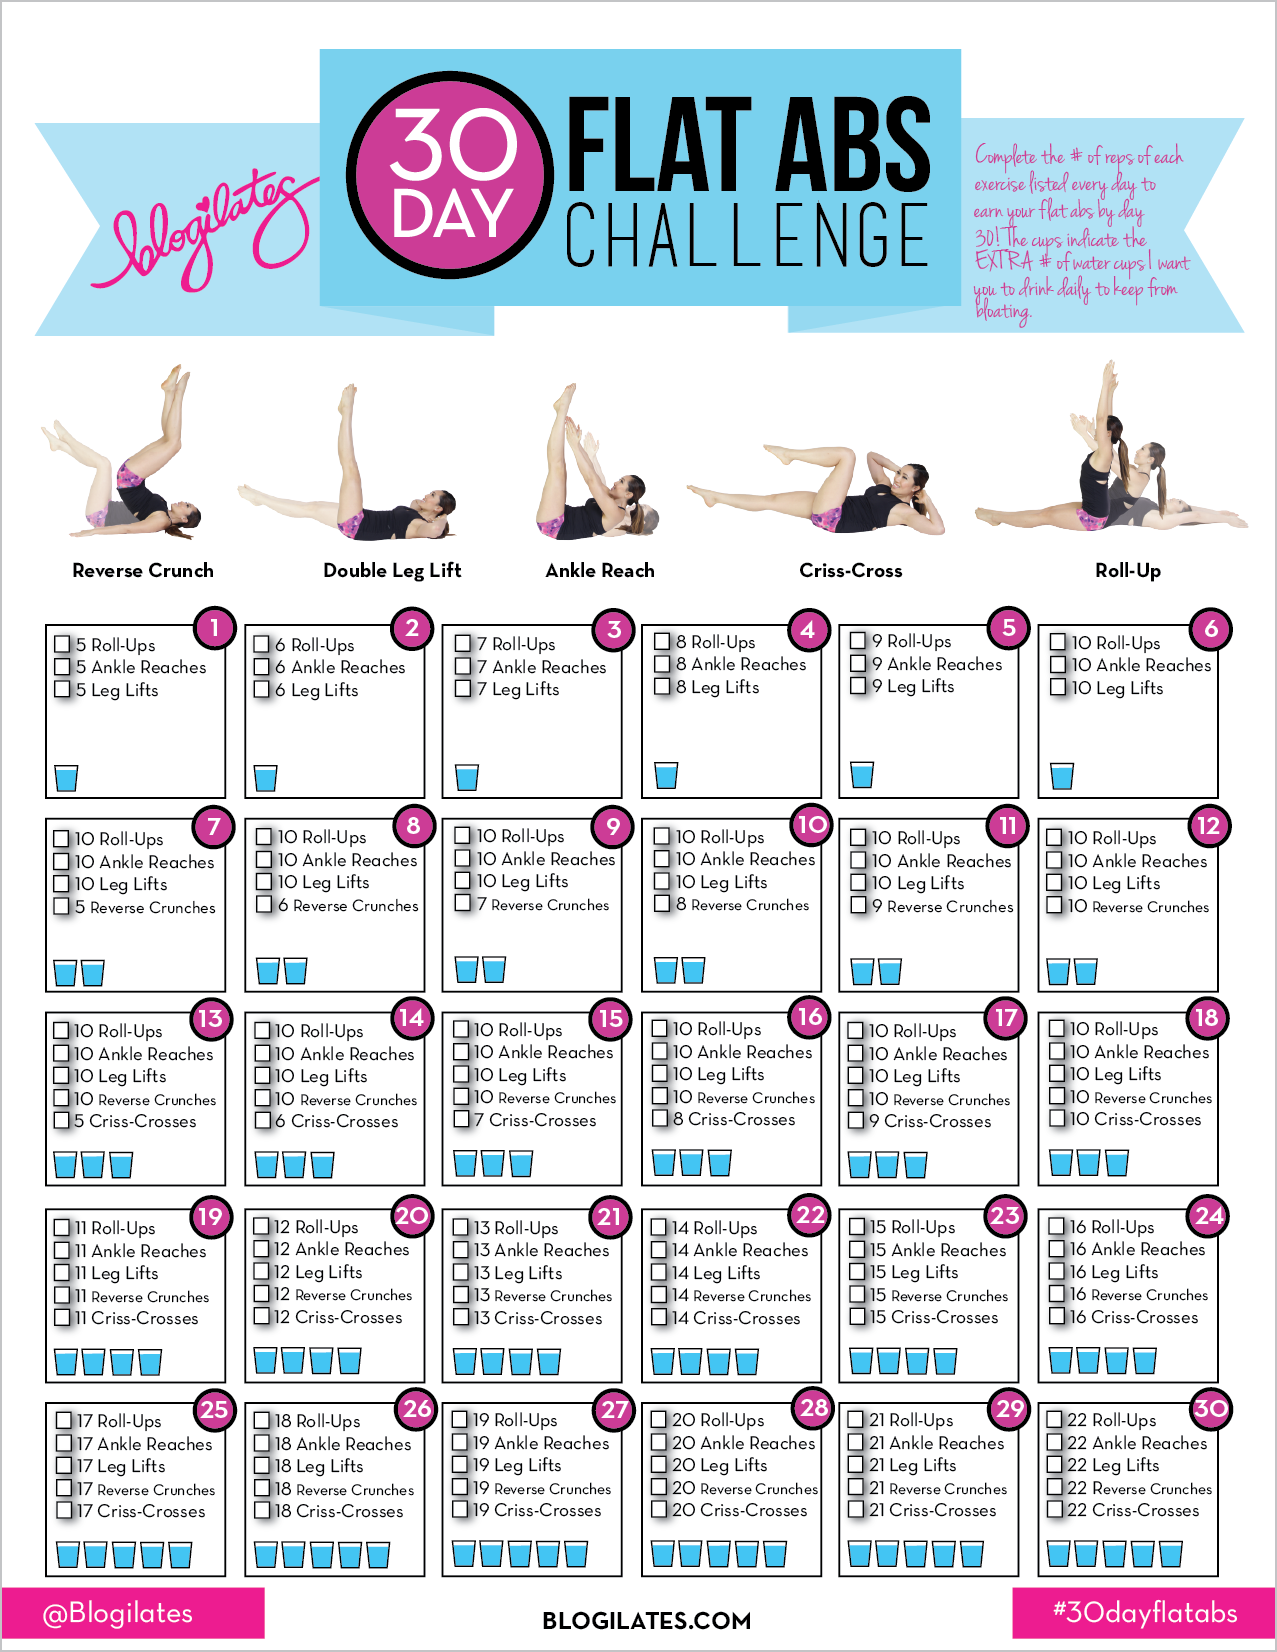 30 Day Flat Abs Challenge!